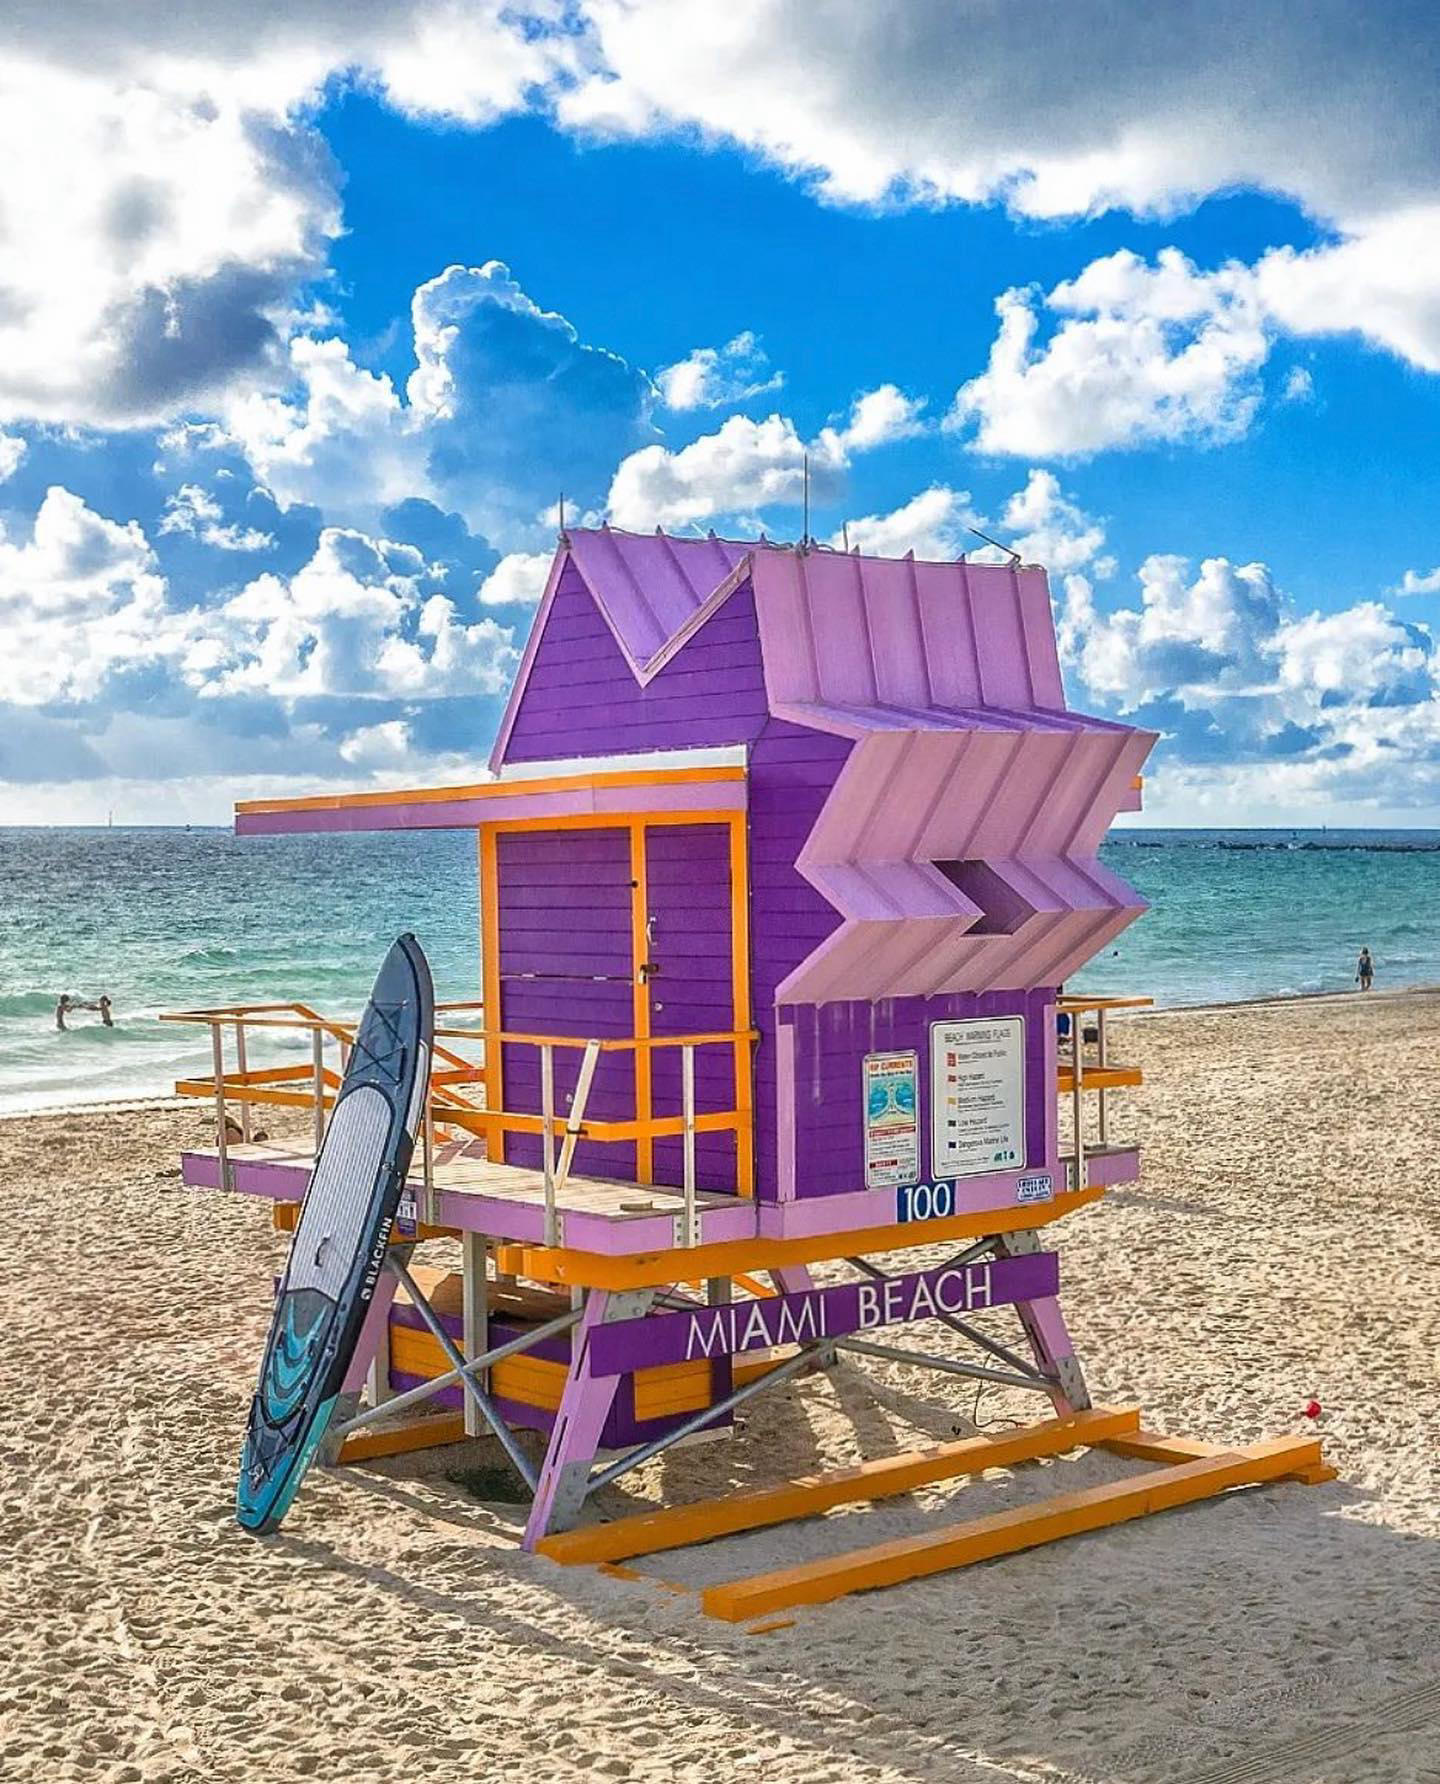 Miami - These brightly colored and completely unique lifeguard towers are one of our favorite things